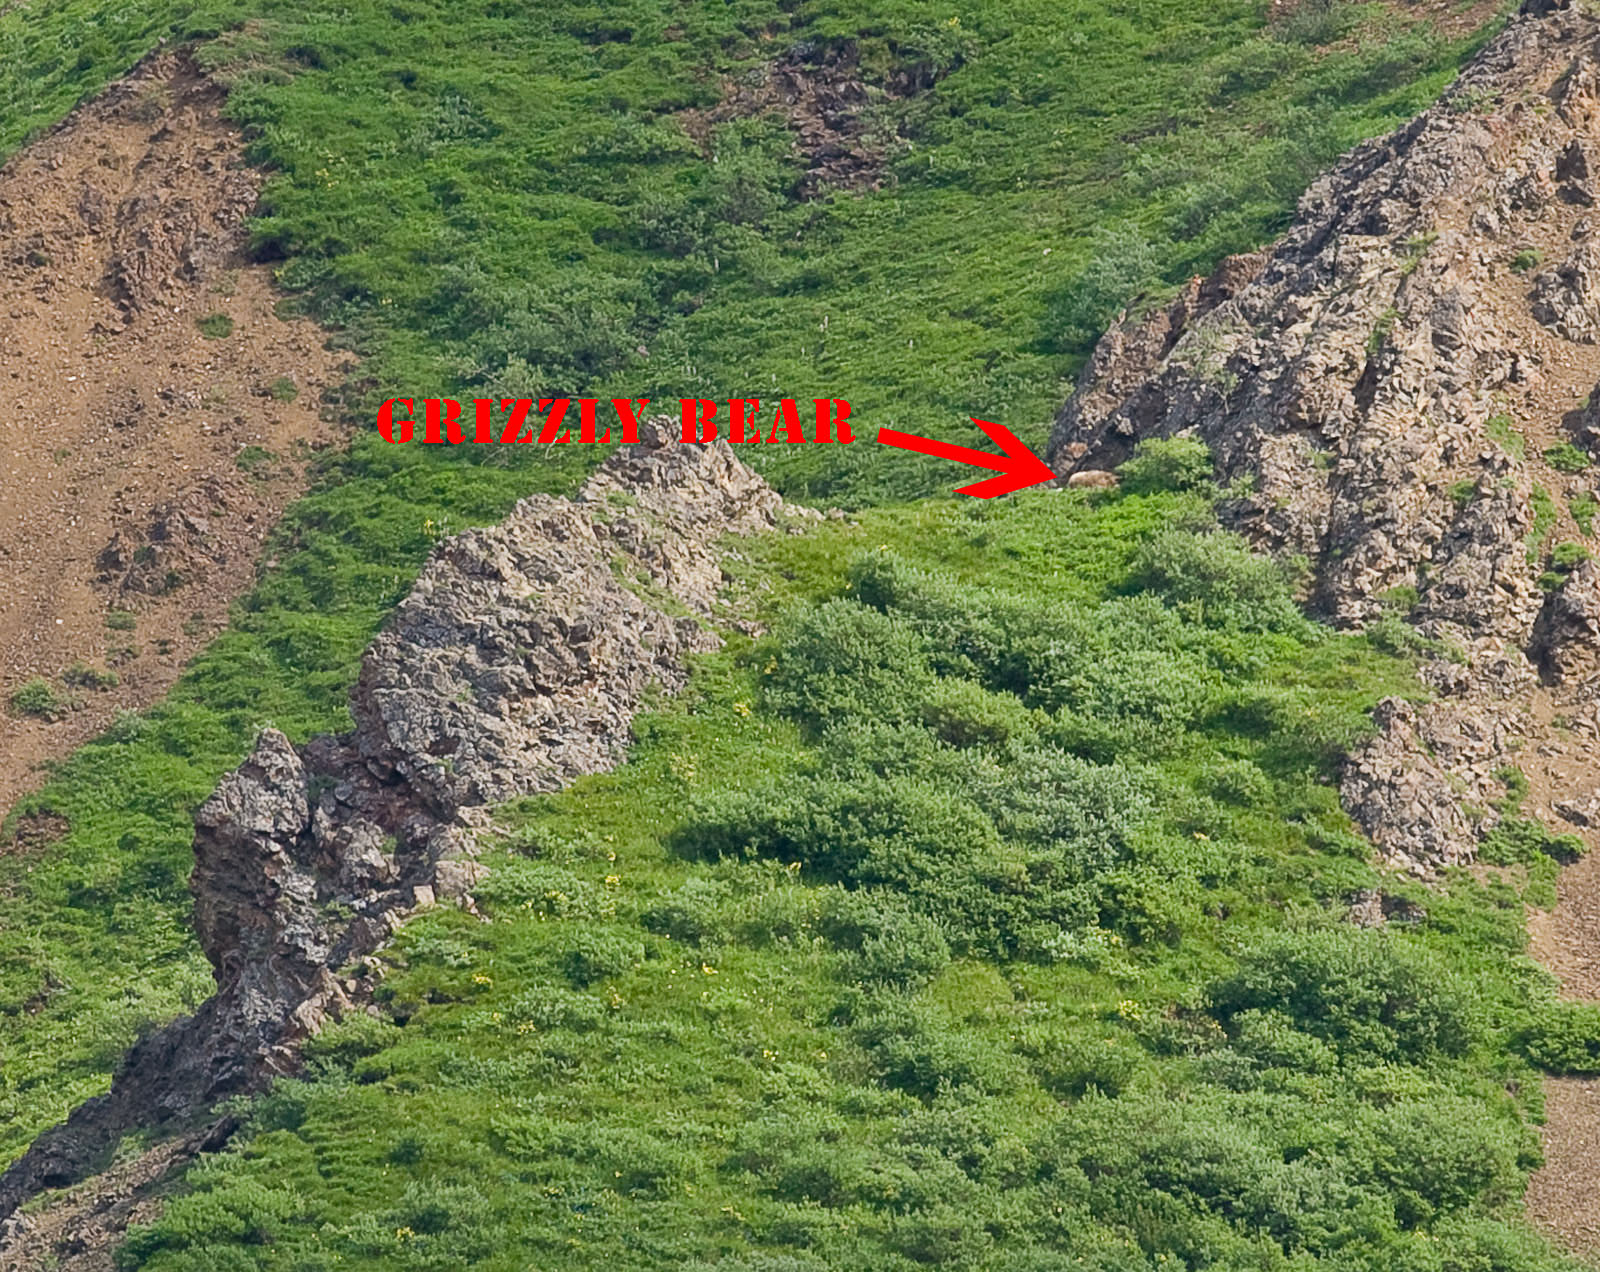 In this "close up" of a grizzly bear laying down on an alpine hillside in Denali National Park, you can almost tell it's a bear. From Denali National Park in Alaska.